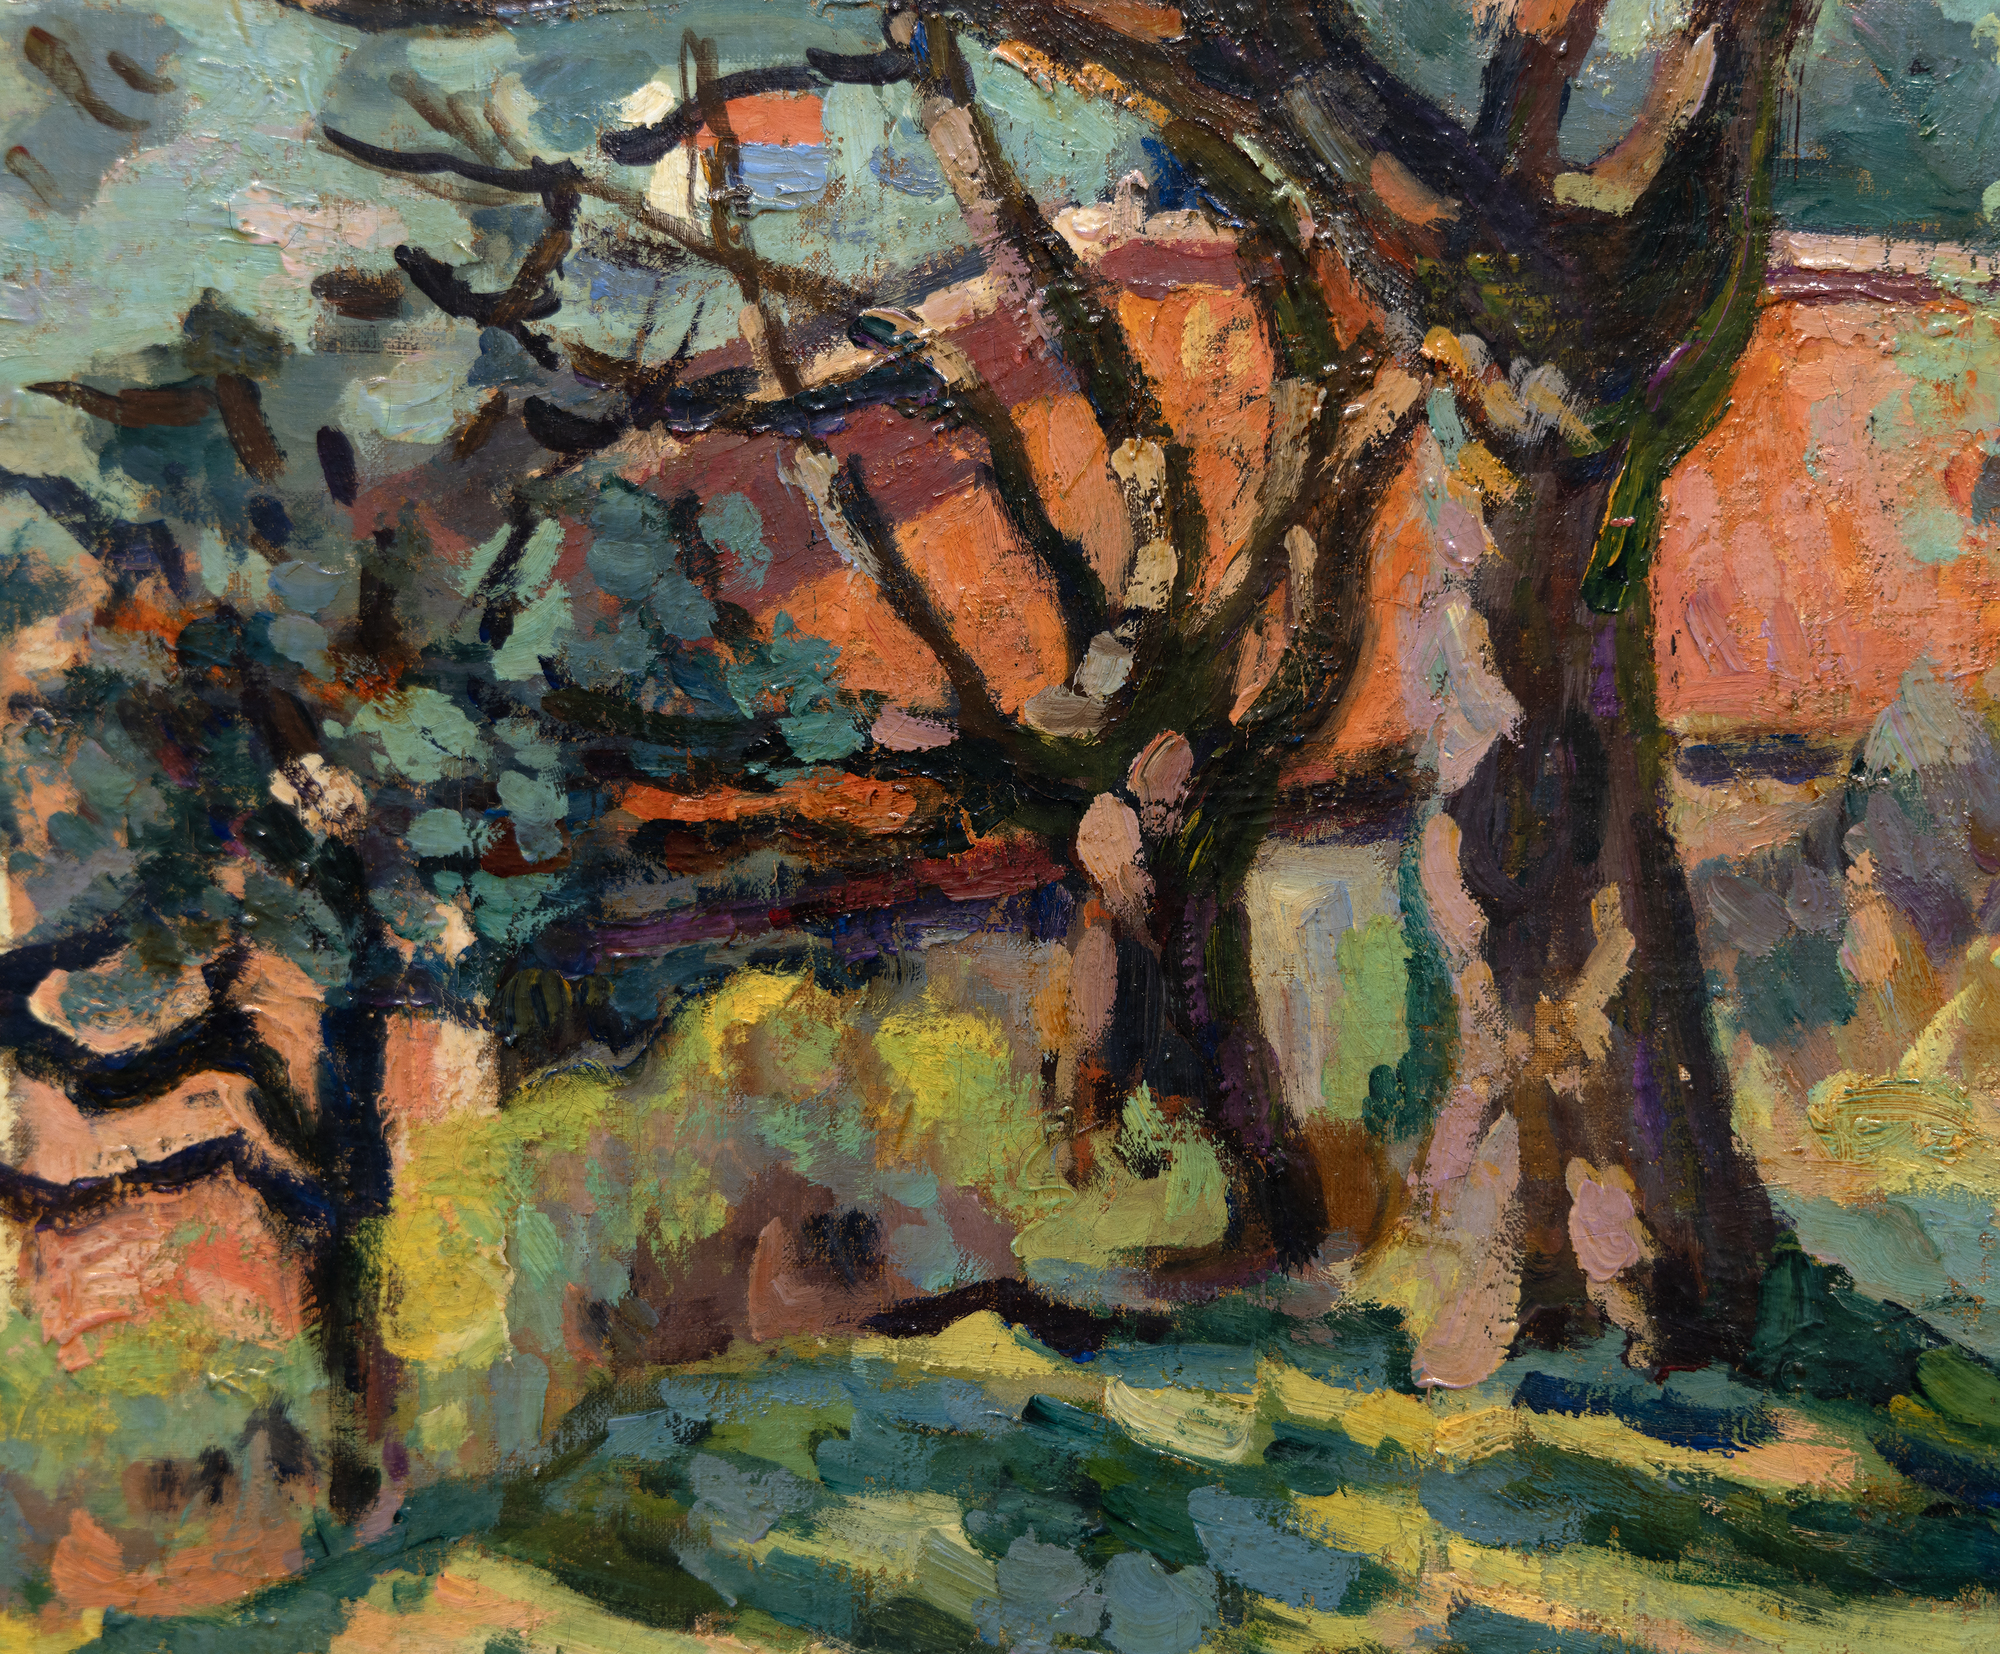 ARMAND GUILLAUMIN - Roquebrune, Le Matin - キャンバスに油彩 - 25 x 31 1/4 in.